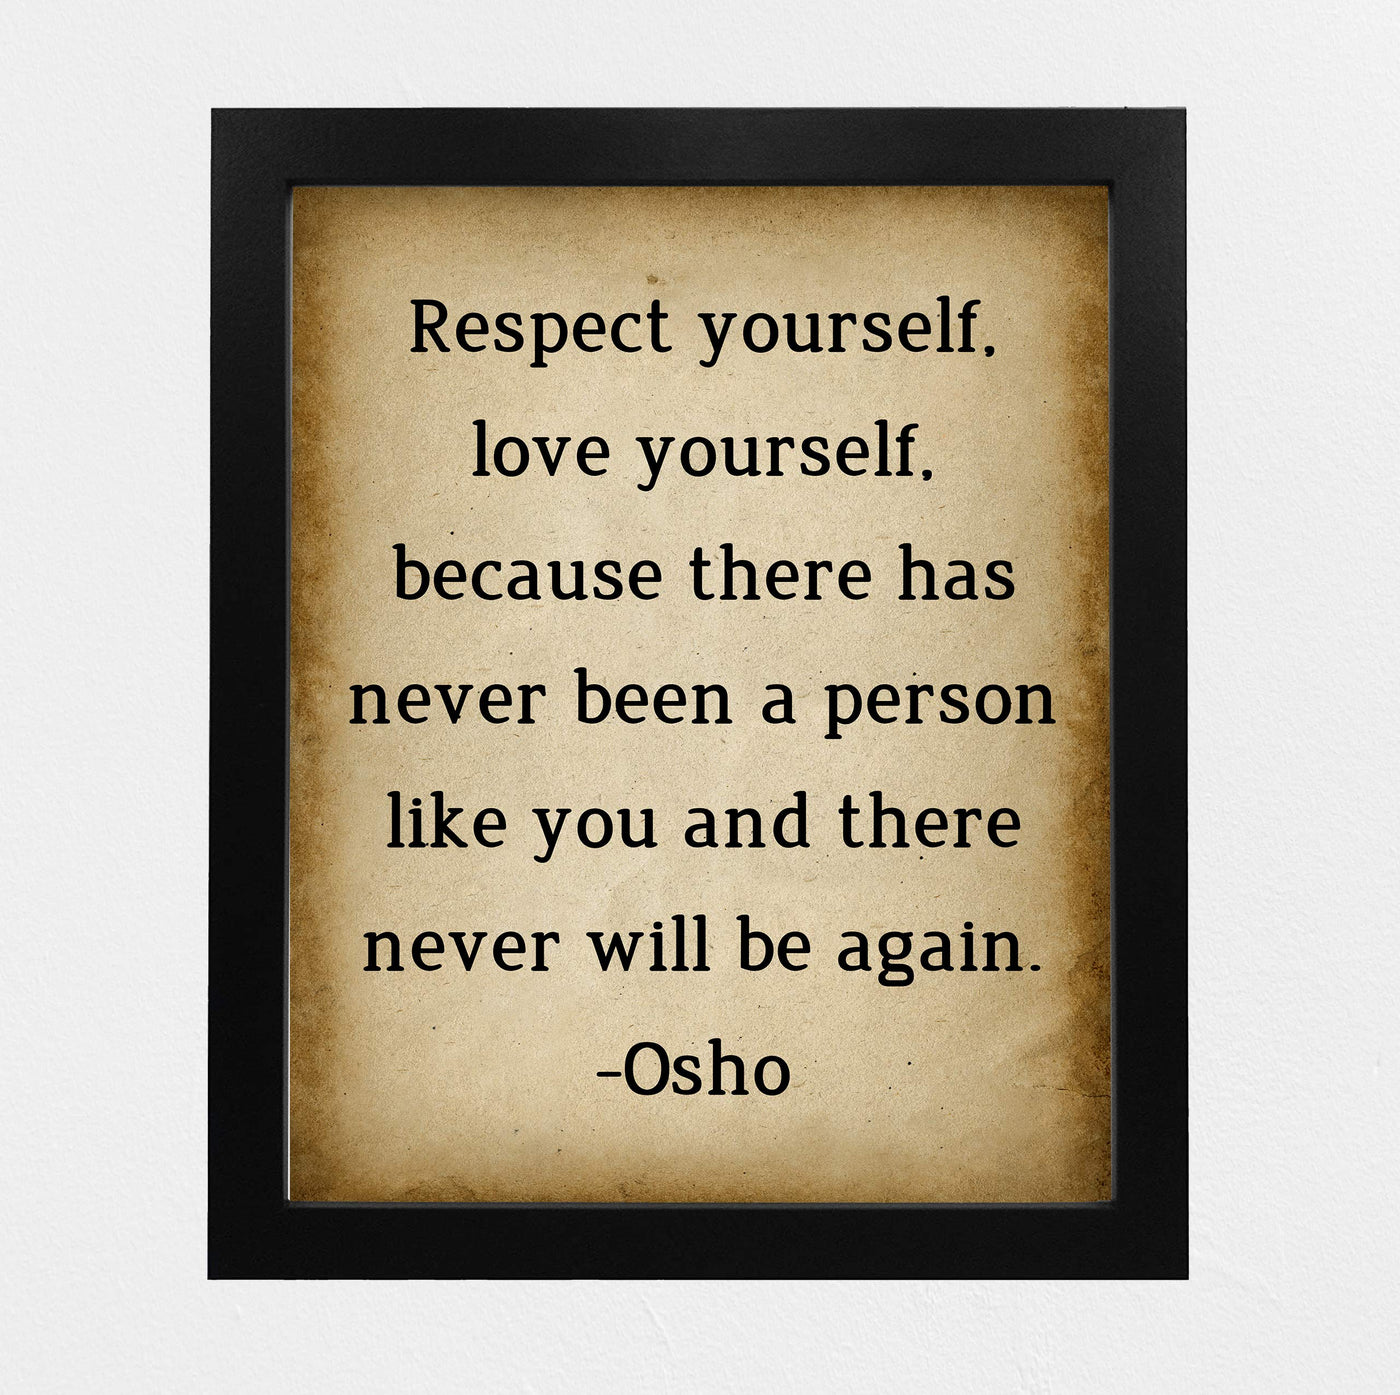 Osho Quotes-"Respect Yourself-Love Yourself" Inspirational Wall Art Decor -8 x 10" Replica Distressed Parchment Spiritual Print-Ready to Frame. Positive Home-Office-Desk-School Decor. Great Zen Gift!